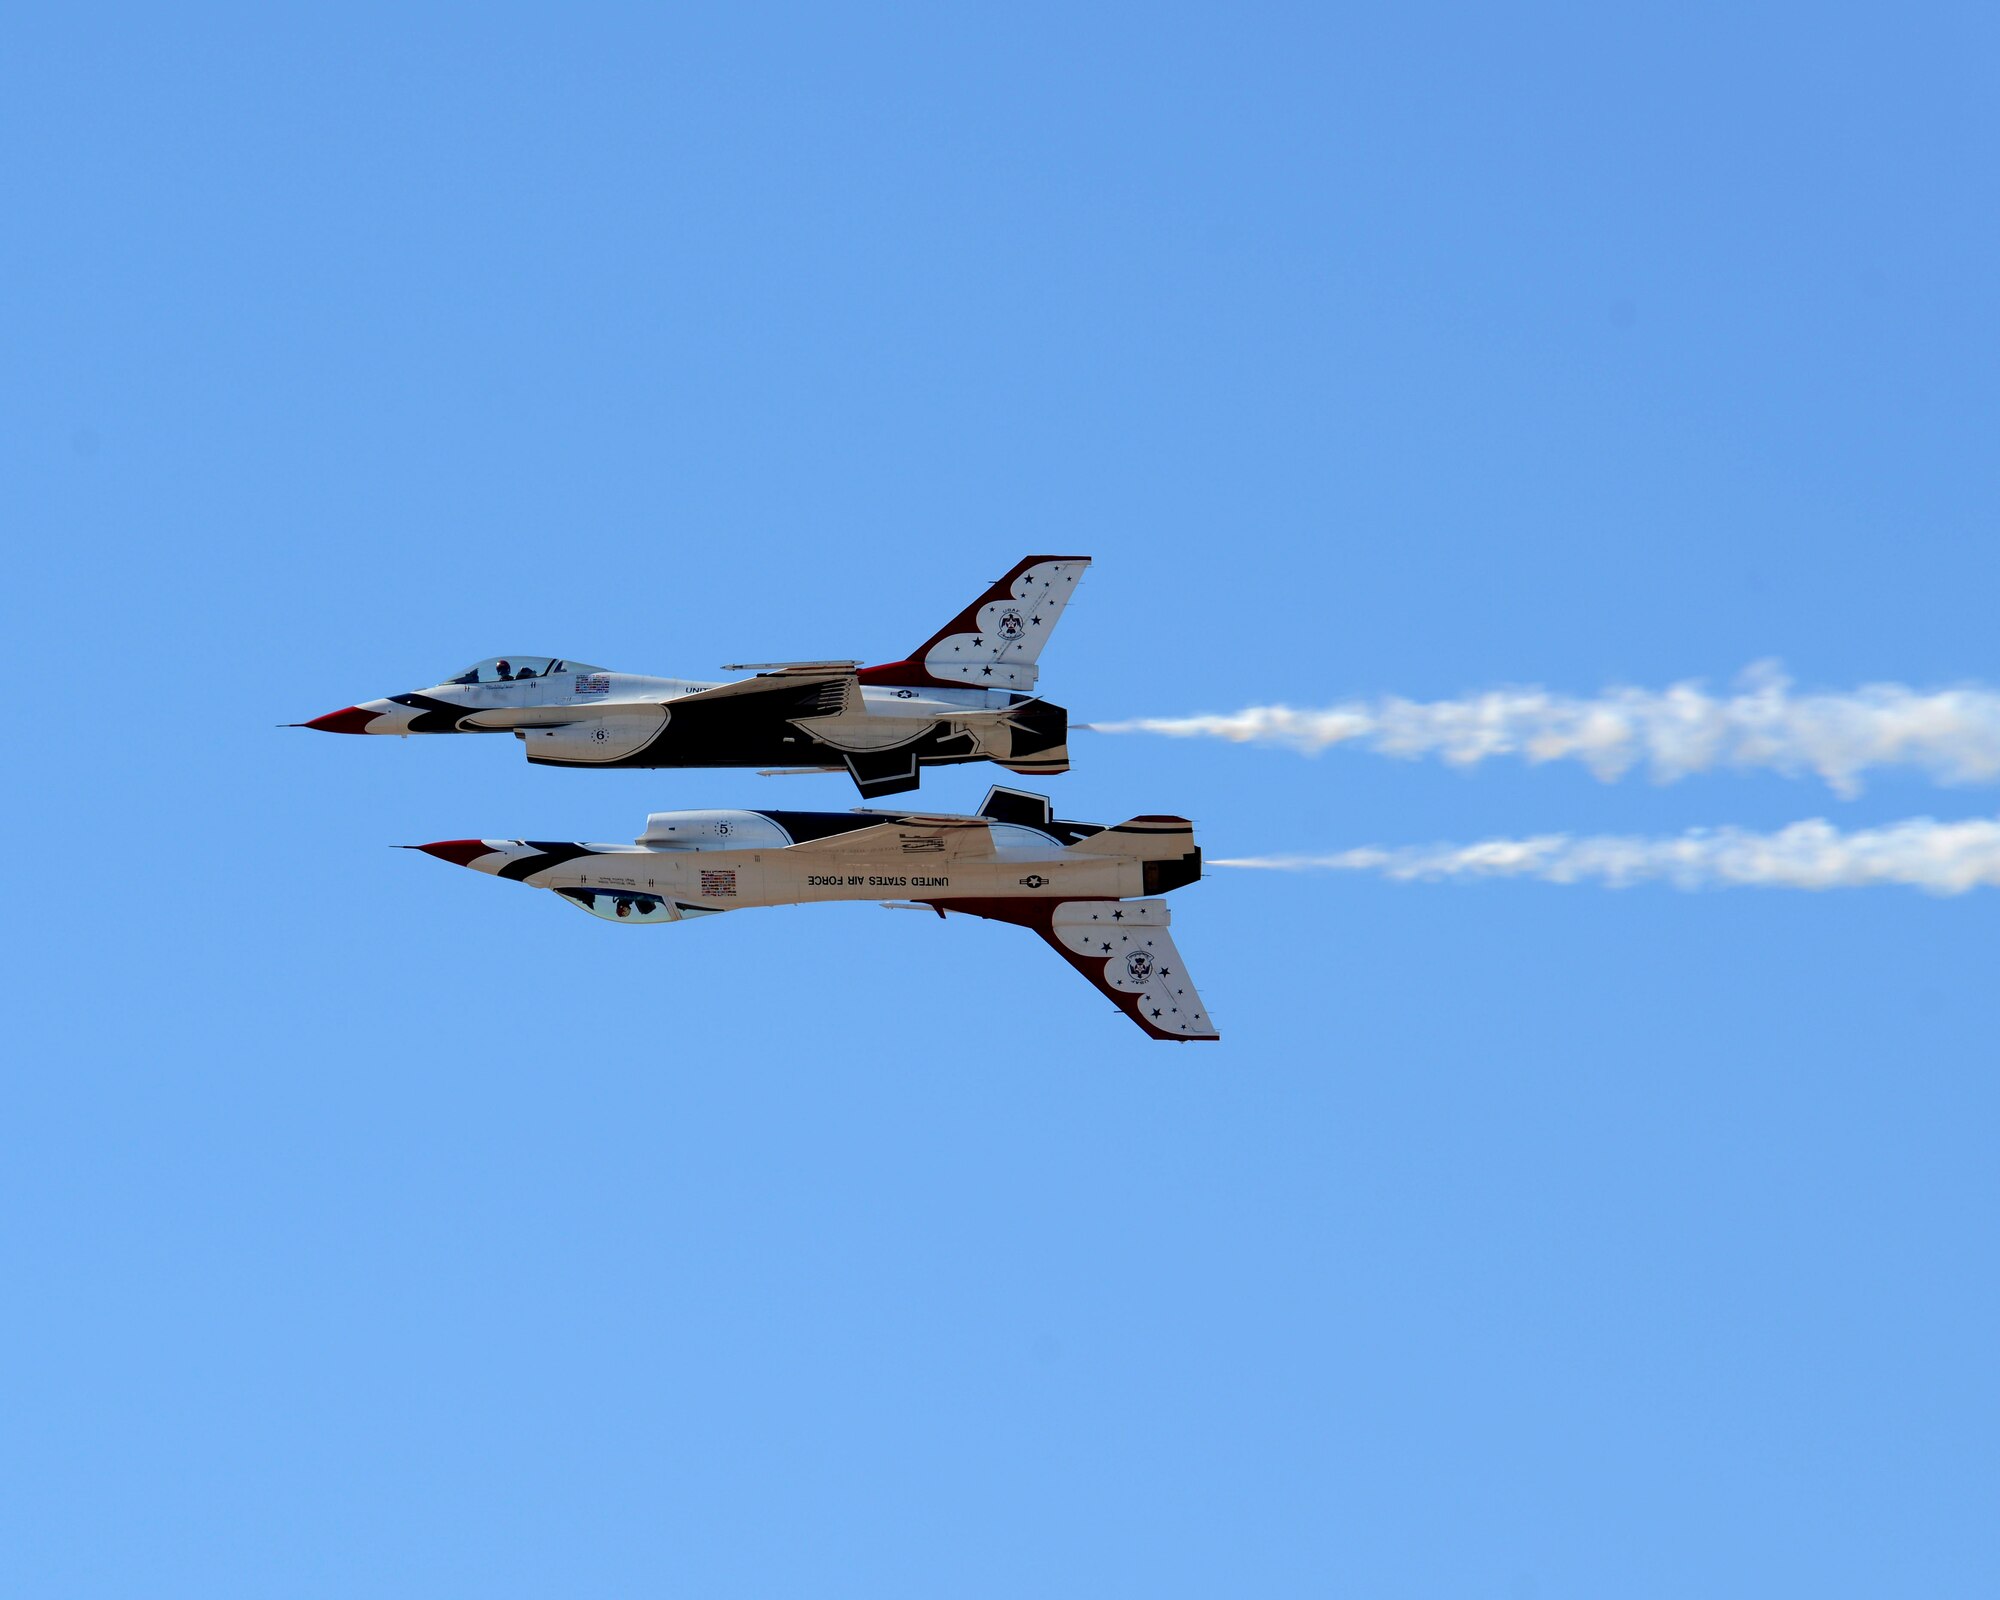 The U.S. Air Force Thunderbirds fly overhead at the Luke Air Force Base air show, 75 Years of Airpower Apr. 2, 2016.  The team performs precision aerial maneuvers to exhibit the capabilities of the modern high-performance aircraft to audiences worldwide.  (U.S. Air Force photo by Senior Airman Devante Williams)